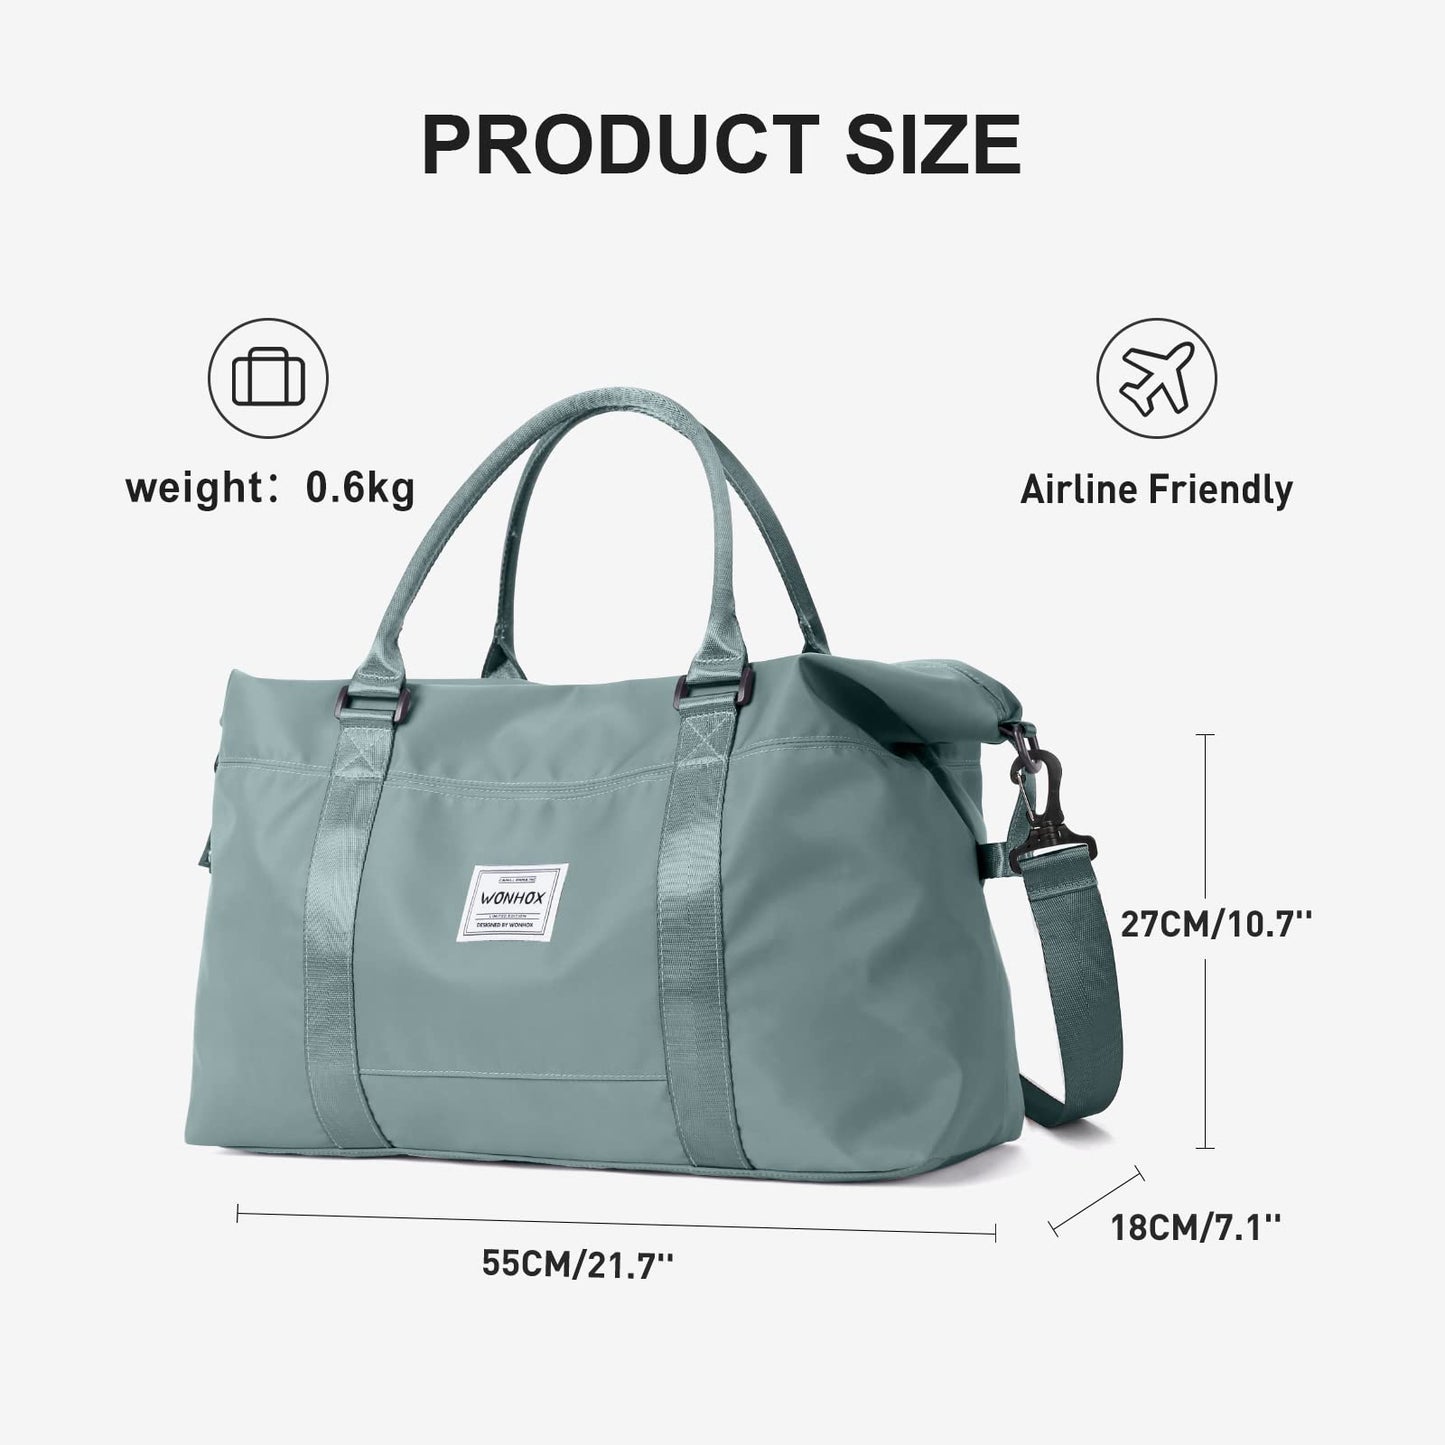 Travel Totes for Women Cabin Bags easyjet Underseat Ryanair Hand Luggage Carry On Bags for Planes Travel Bag Holdall Sport Duffel Bag Mens with Wet Pocket Weekend Overnight Bag Gym Bag Hospital Bag,